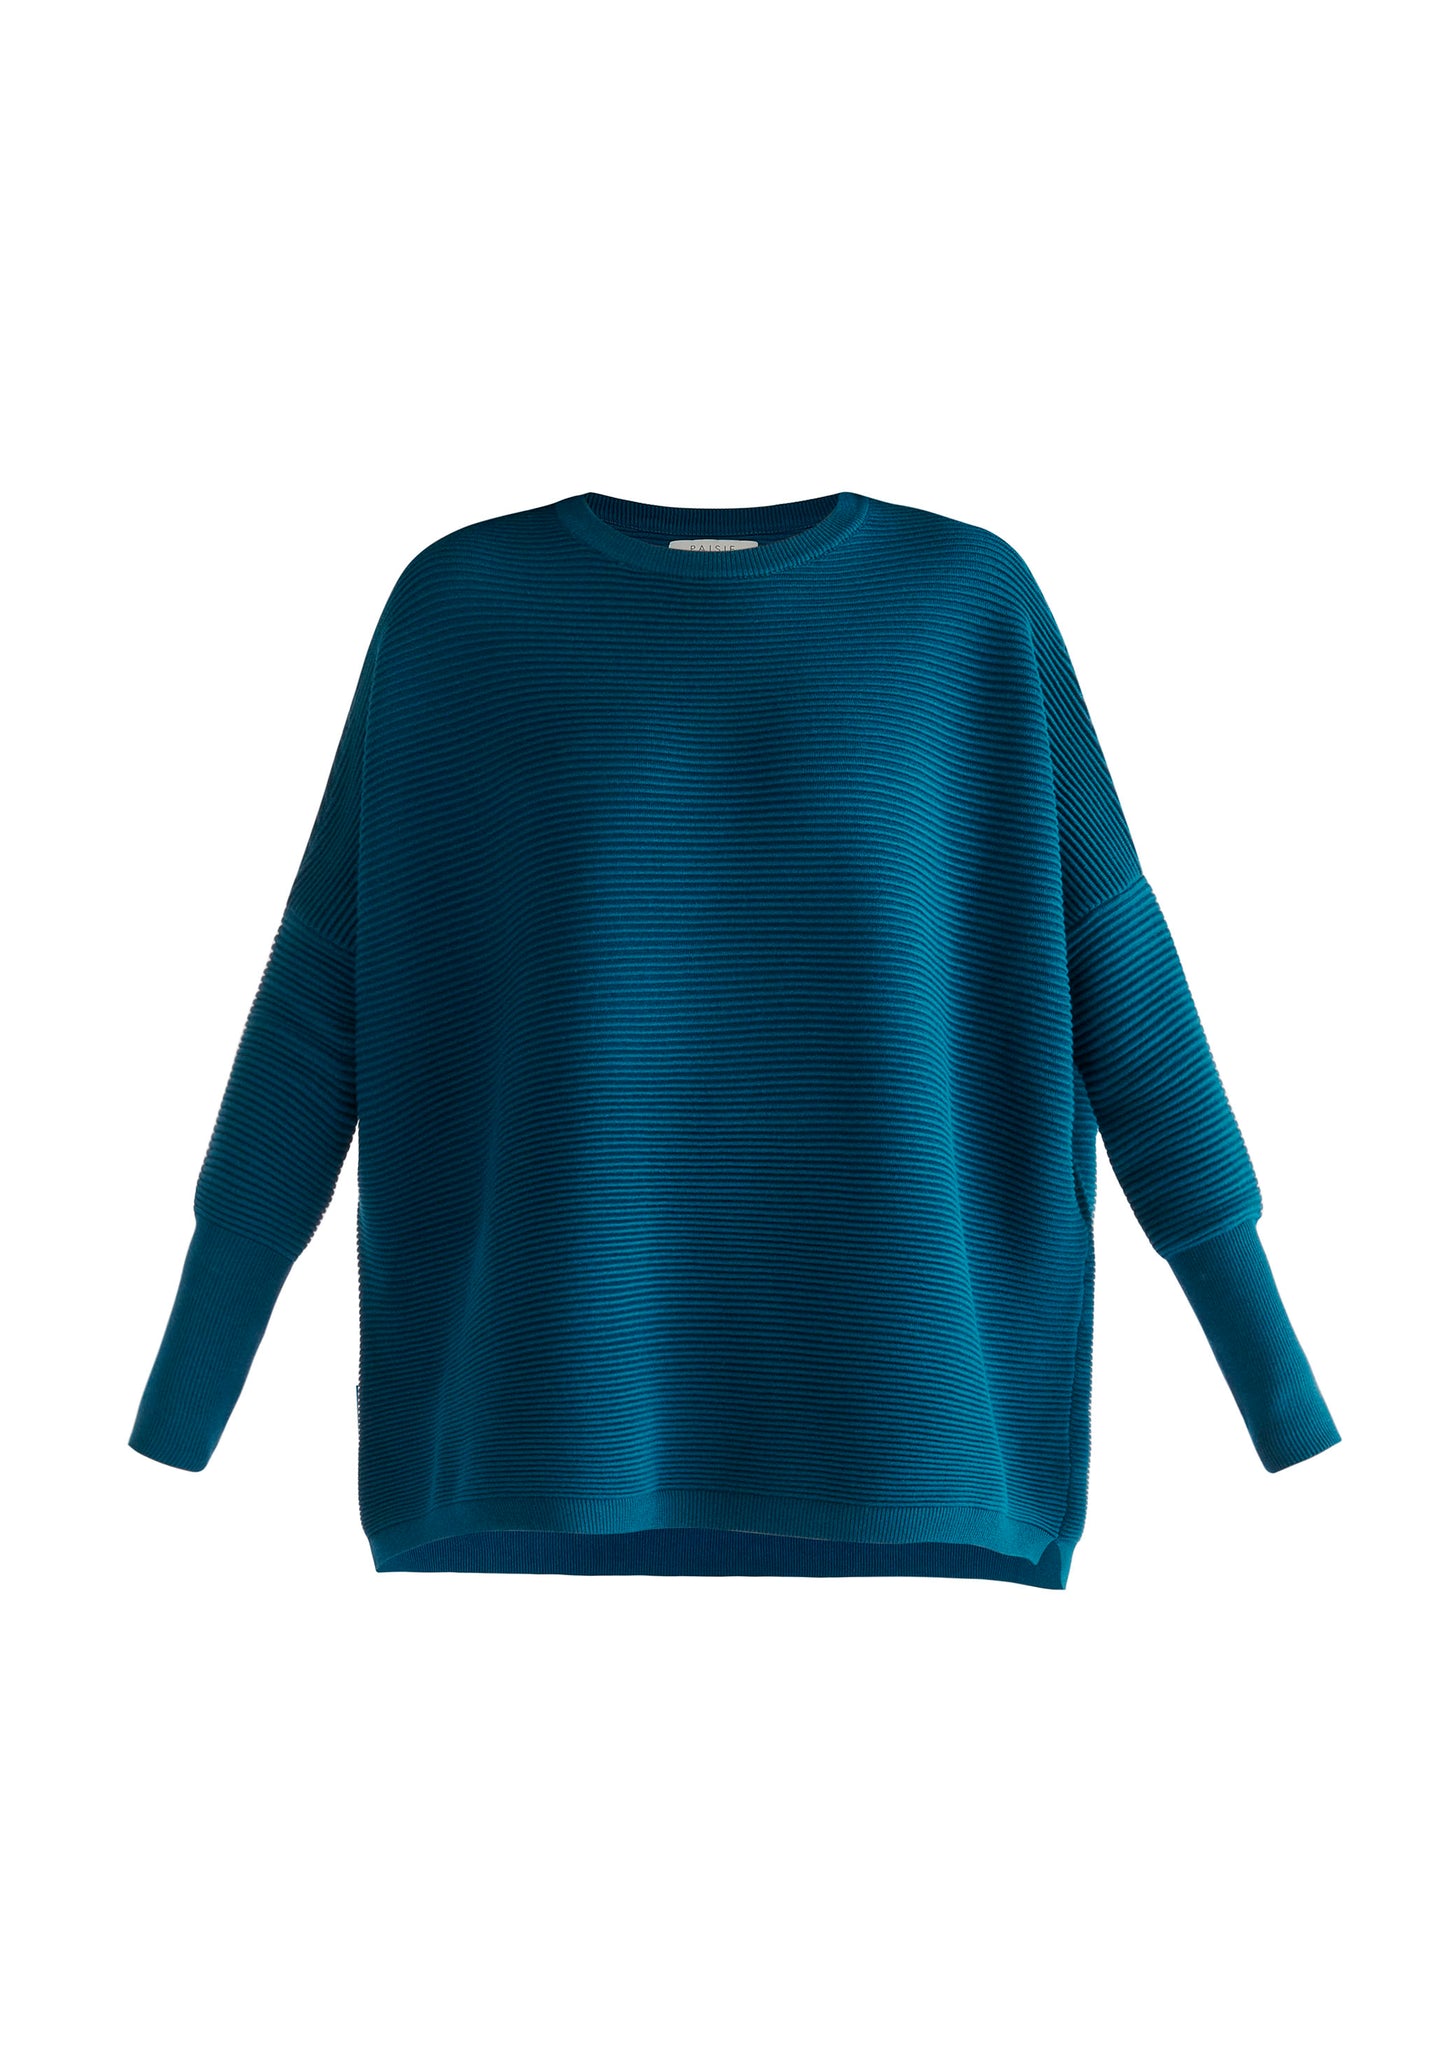 Paisie Ribbed Oversized Knit Jumper in Ocean Blue | Knitwear | Paisie